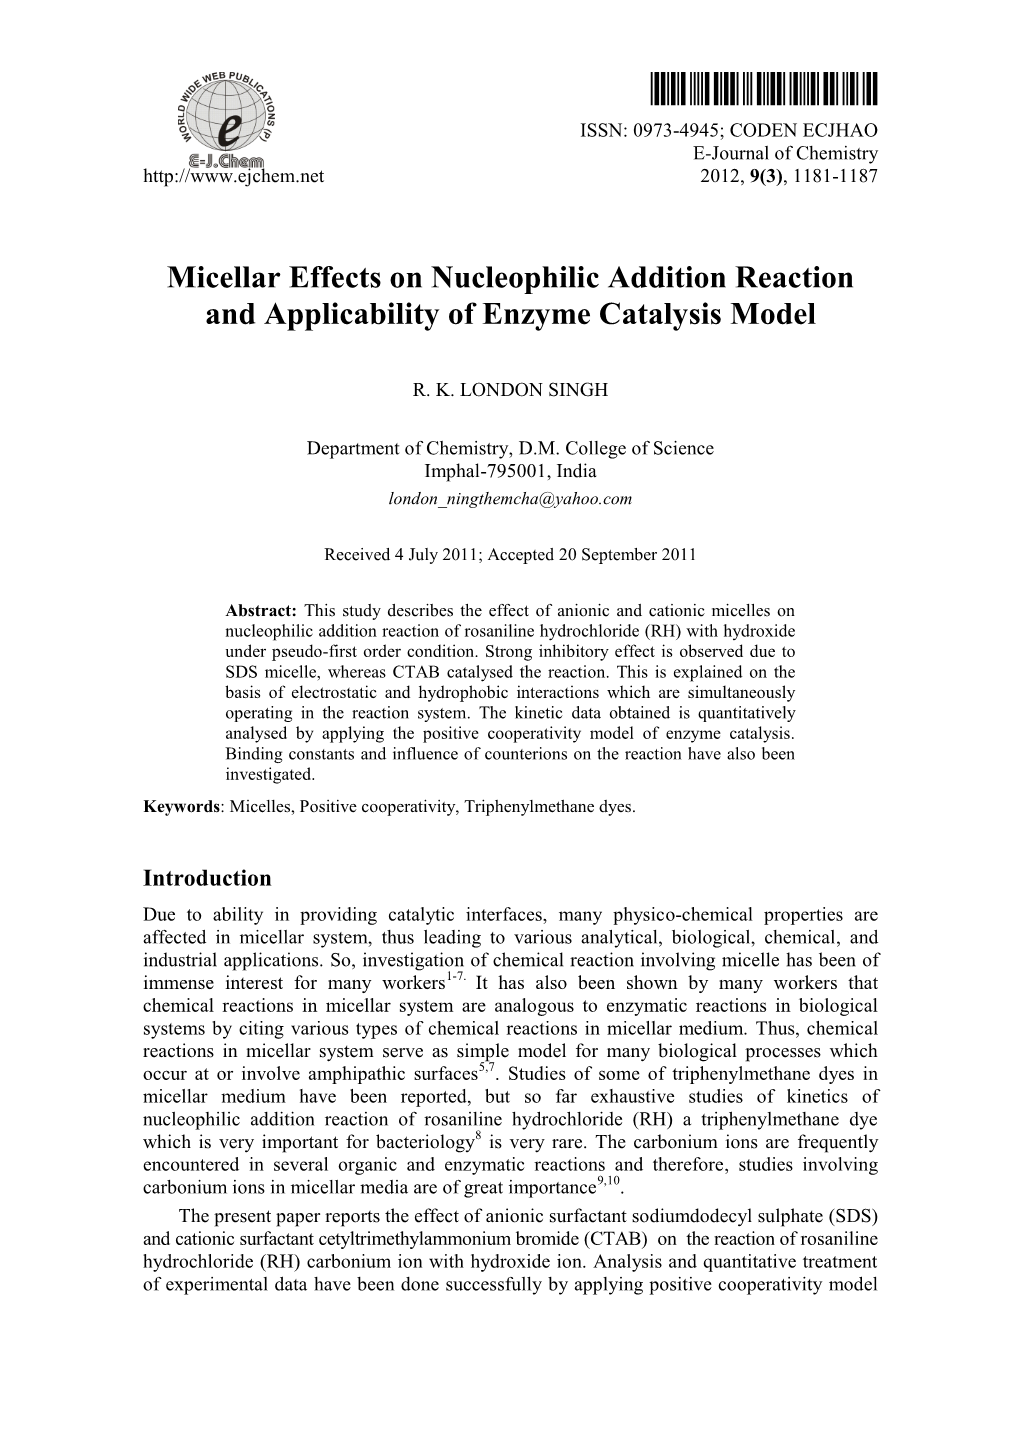 Micellar Effects on Nucleophilic Addition Reaction and Applicability of Enzyme Catalysis Model